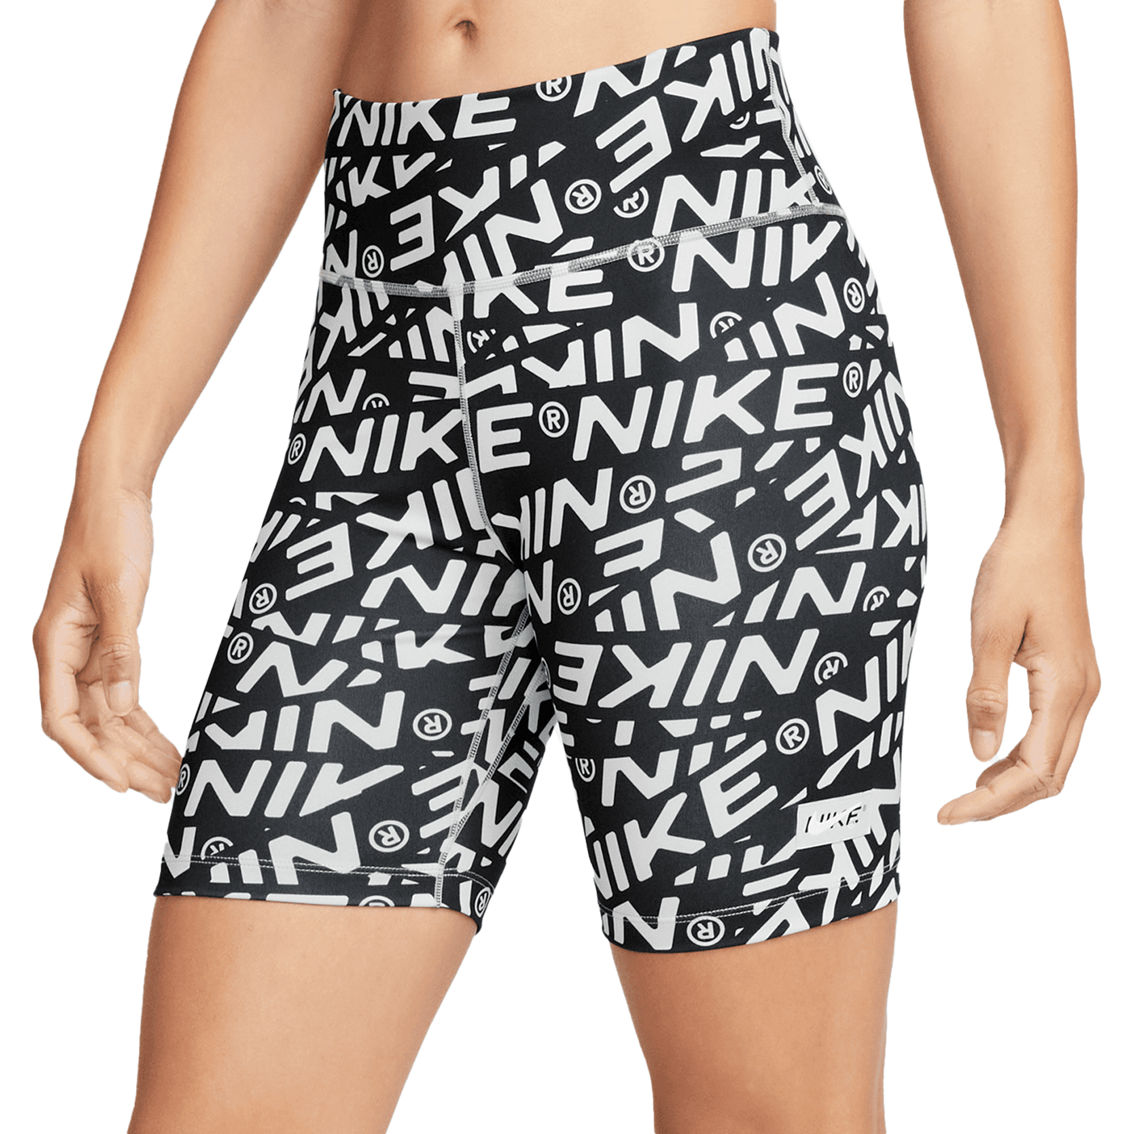 Nike One Dri Fit 7 In. Print Shorts | Shorts | Clothing & Accessories ...